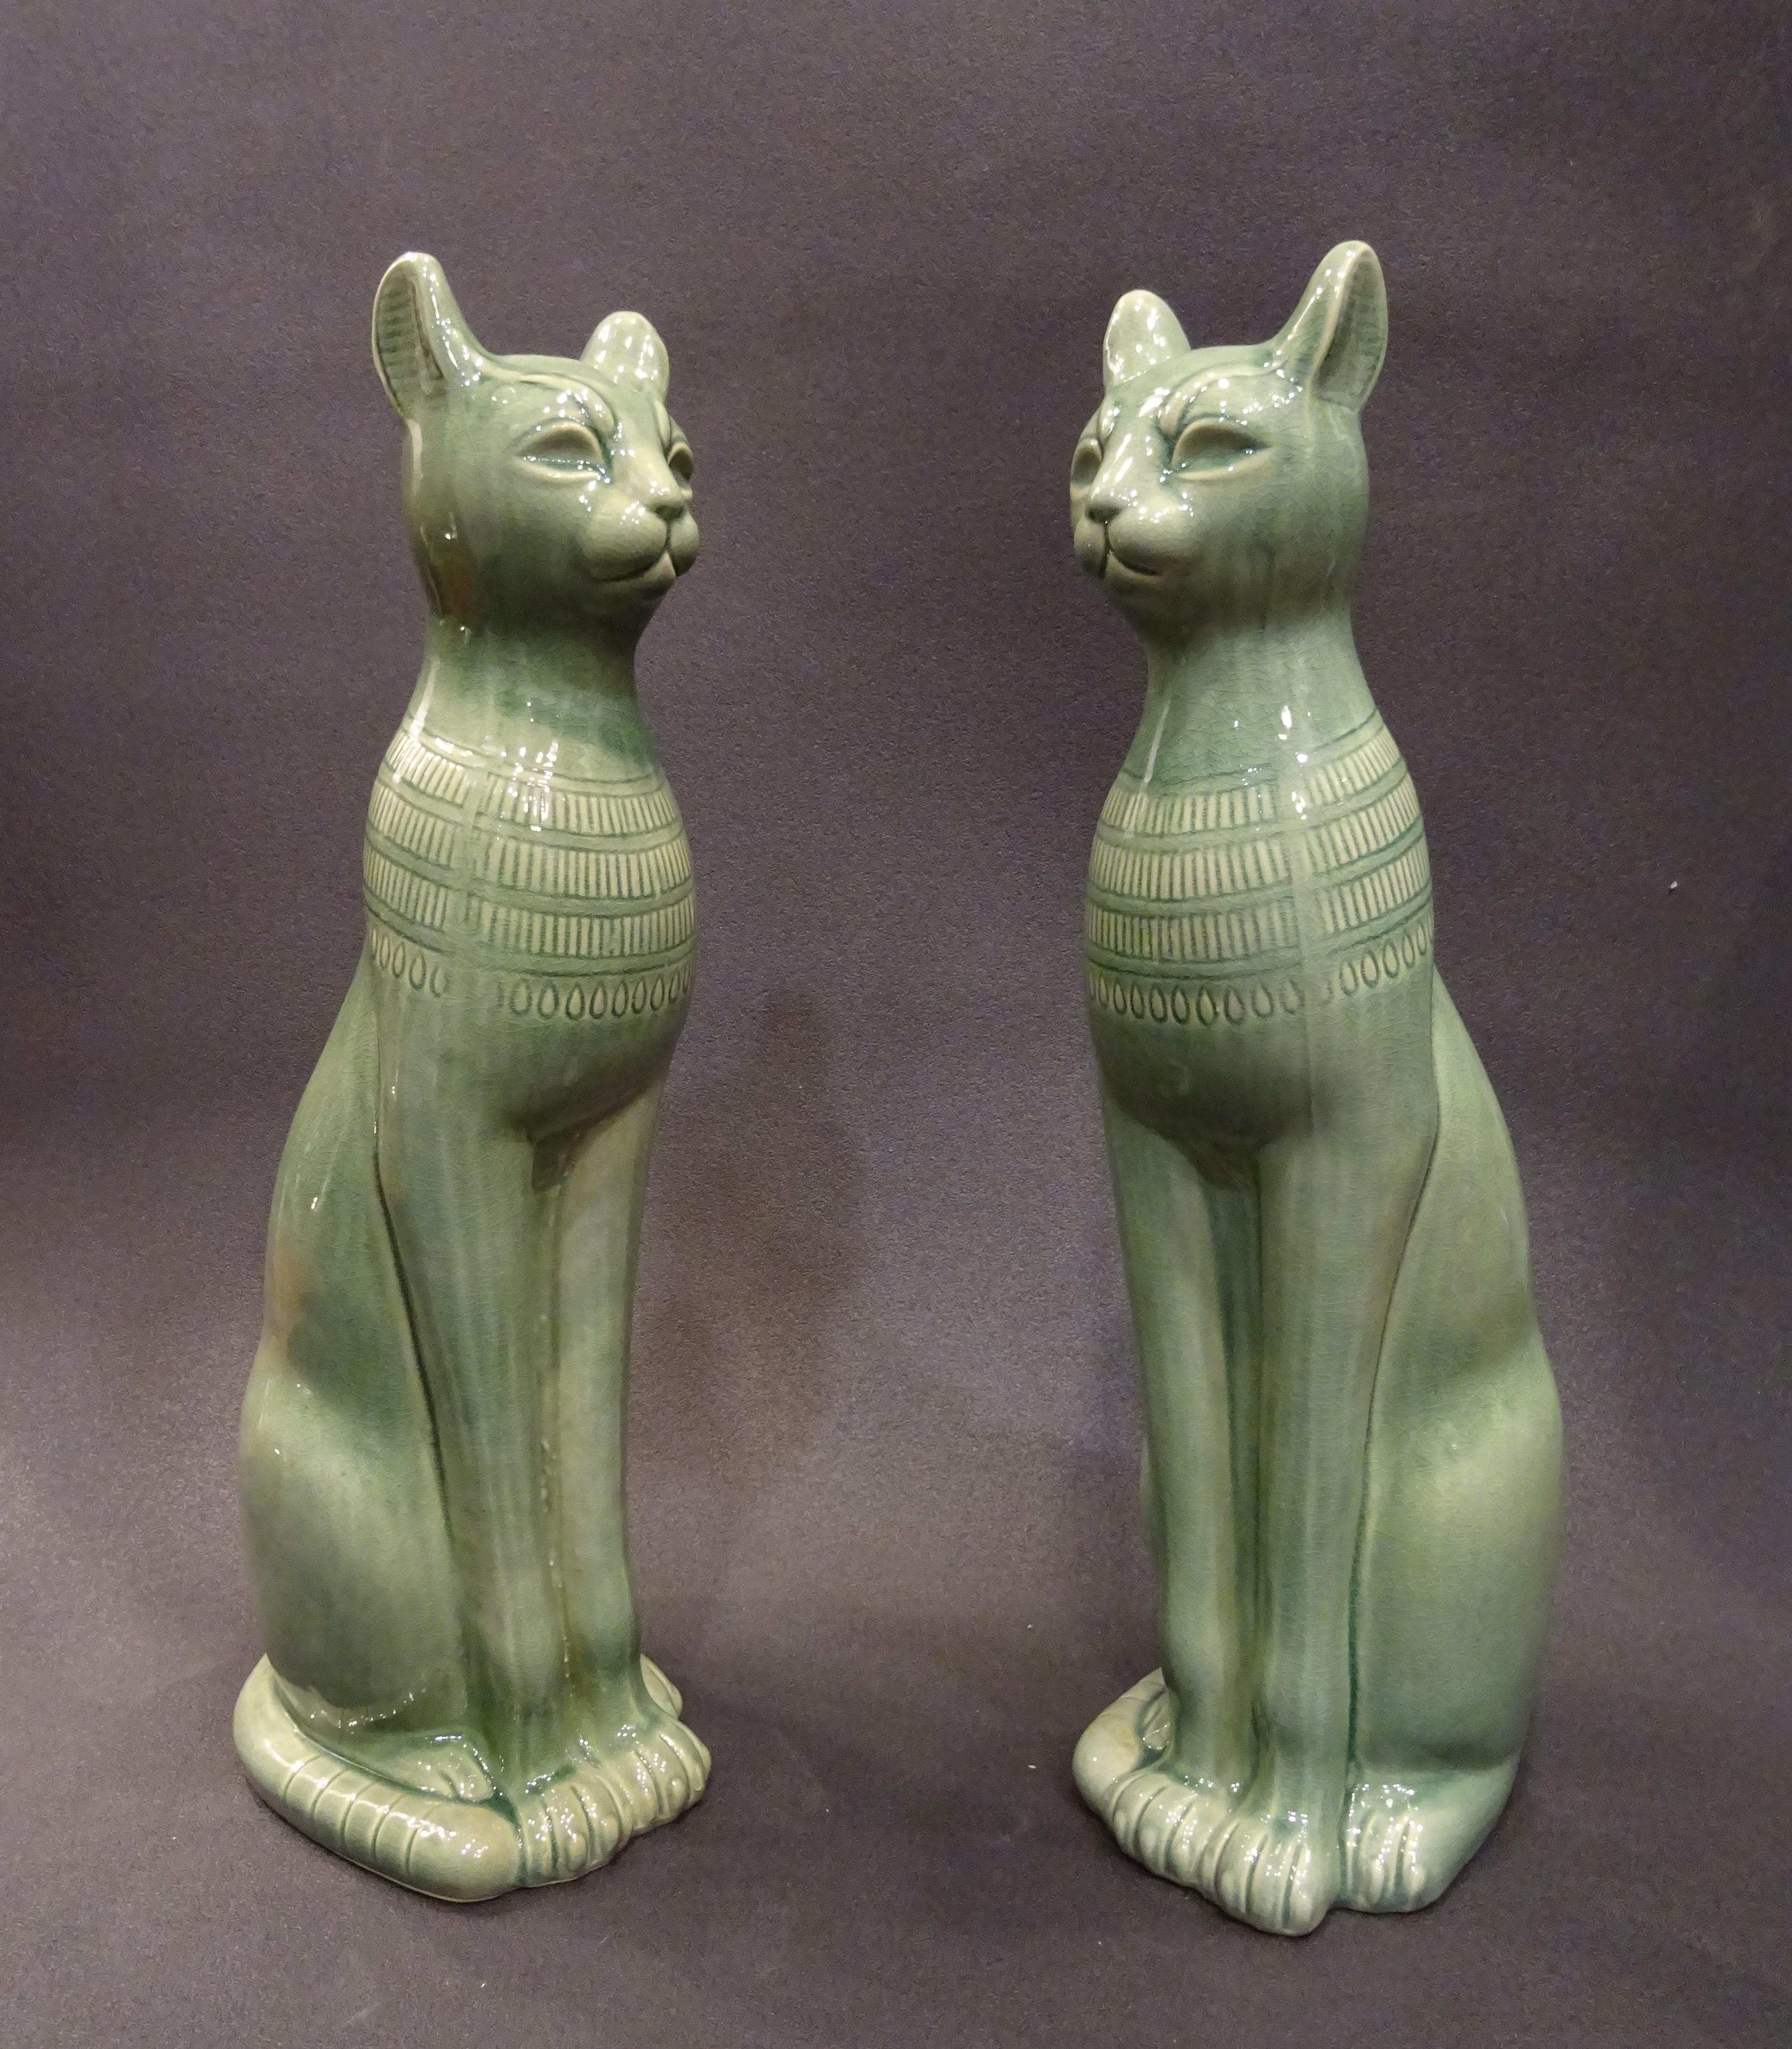 Amazing couple of Italian cats with Egyptian bearing and hieratic attitude, very refined and elegance sculptures in an extraordinary and beautiful celadon color, giving them a unique oriental touch.
They are very difficult pieces to find and very